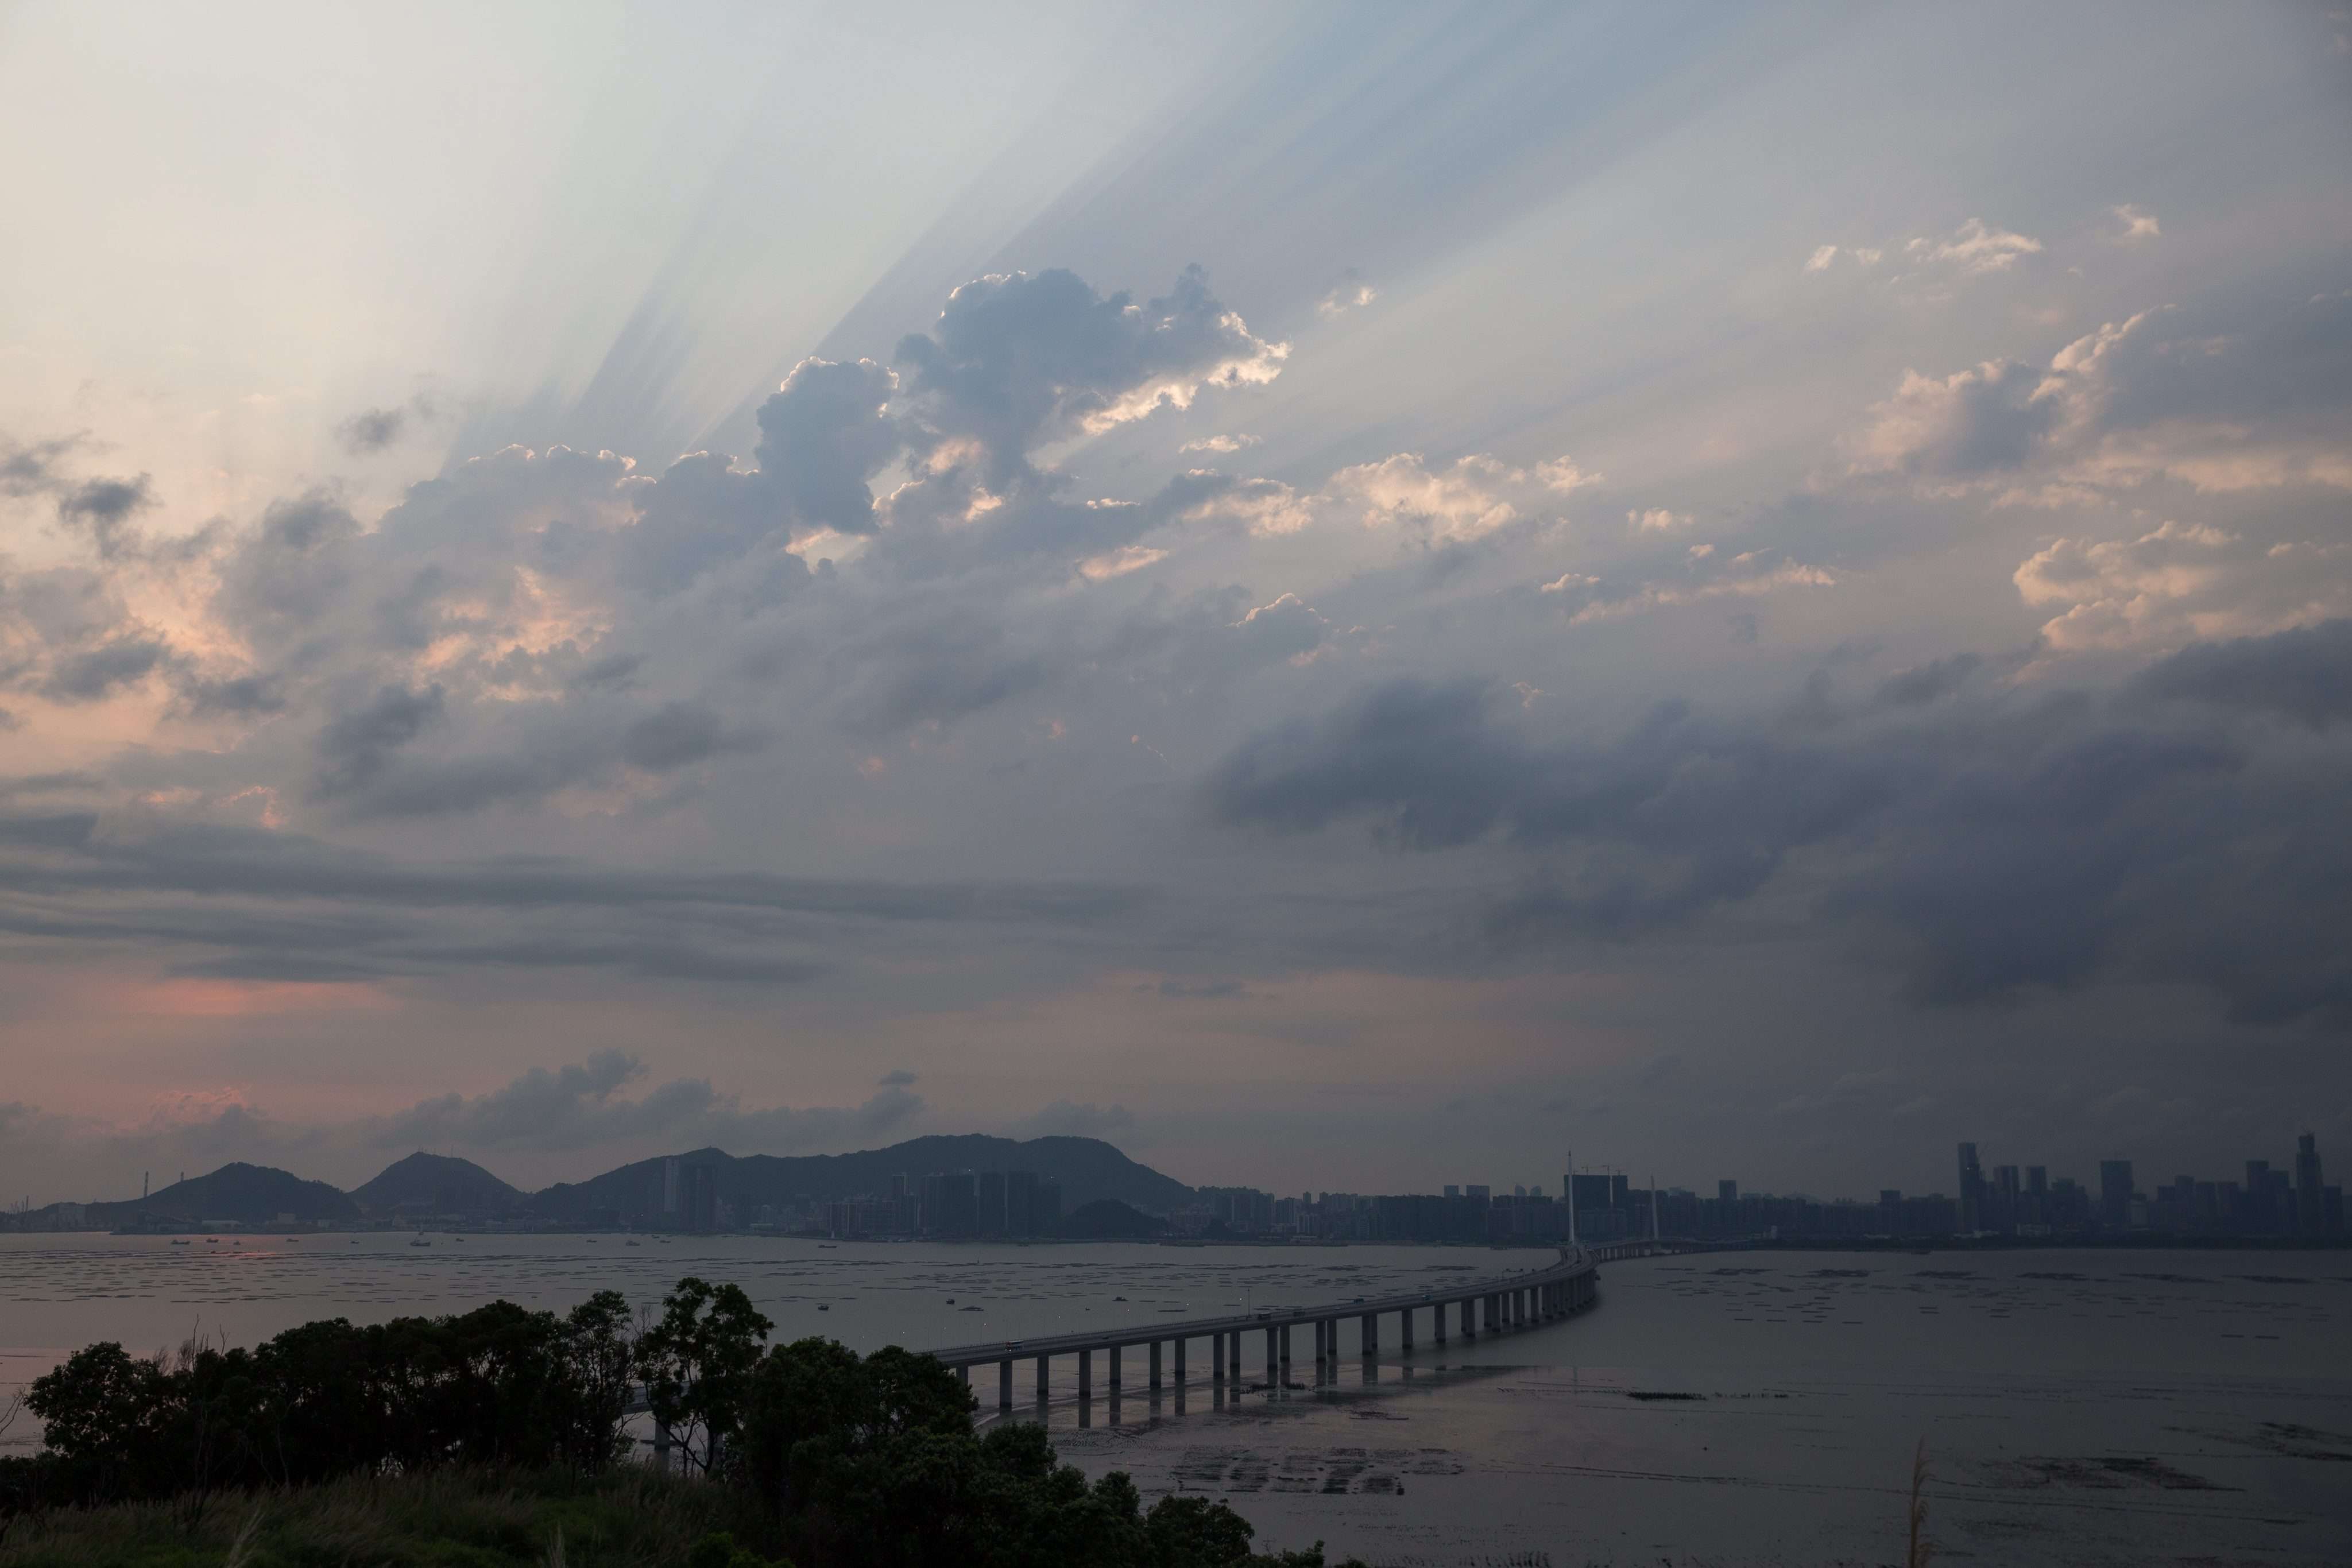 The Shenzhen Bay Bridge spanning across Deep Bay in Hong Kong links the city with Shenzhen’s Nanshan district. Any amendment to our Basic Law should not contradict China’s underlying policies on the SAR’s autonomy. Photo: EPA